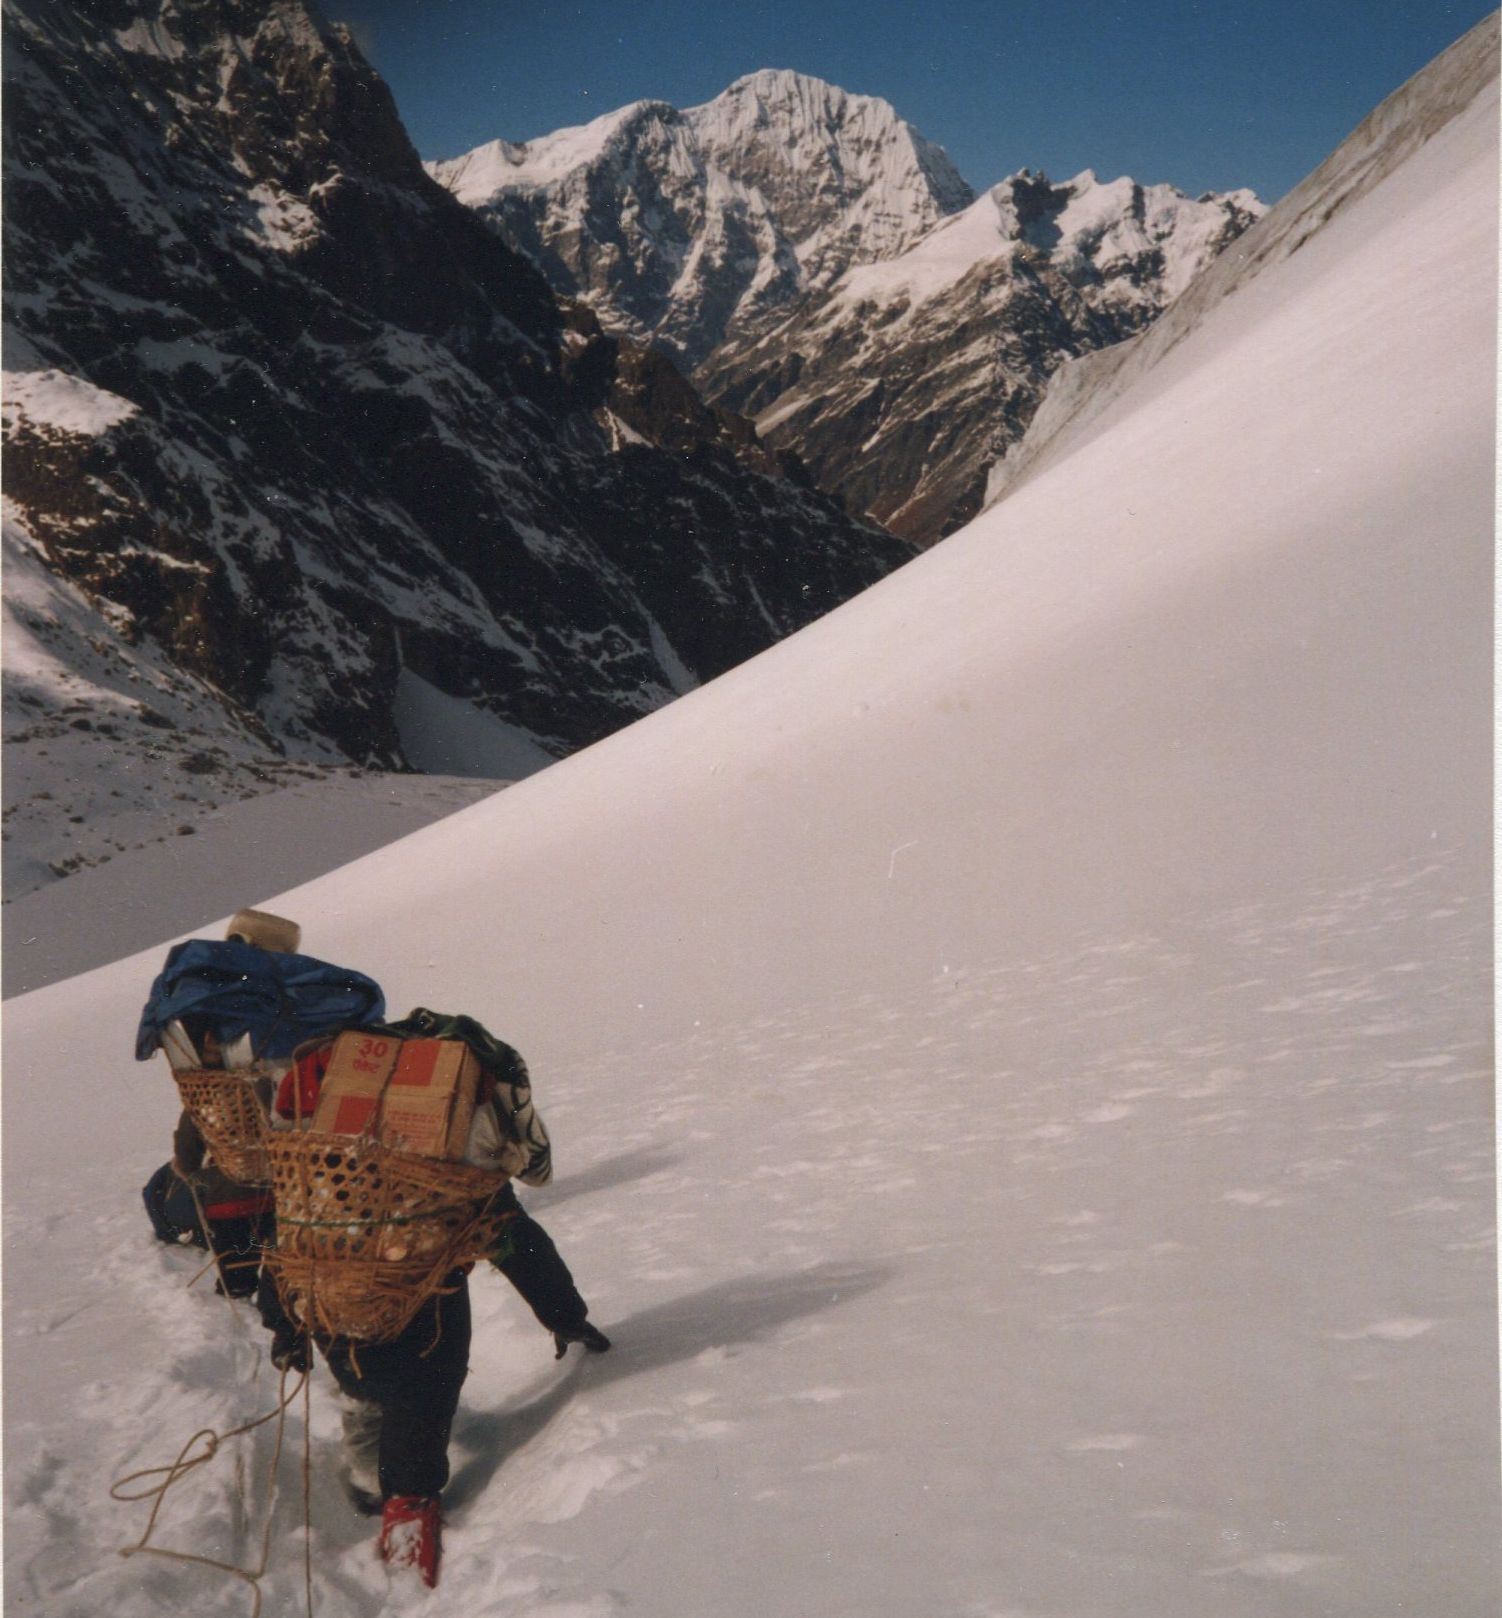 Shalbachum in Langtang Himal on descent from Tilman's Pass